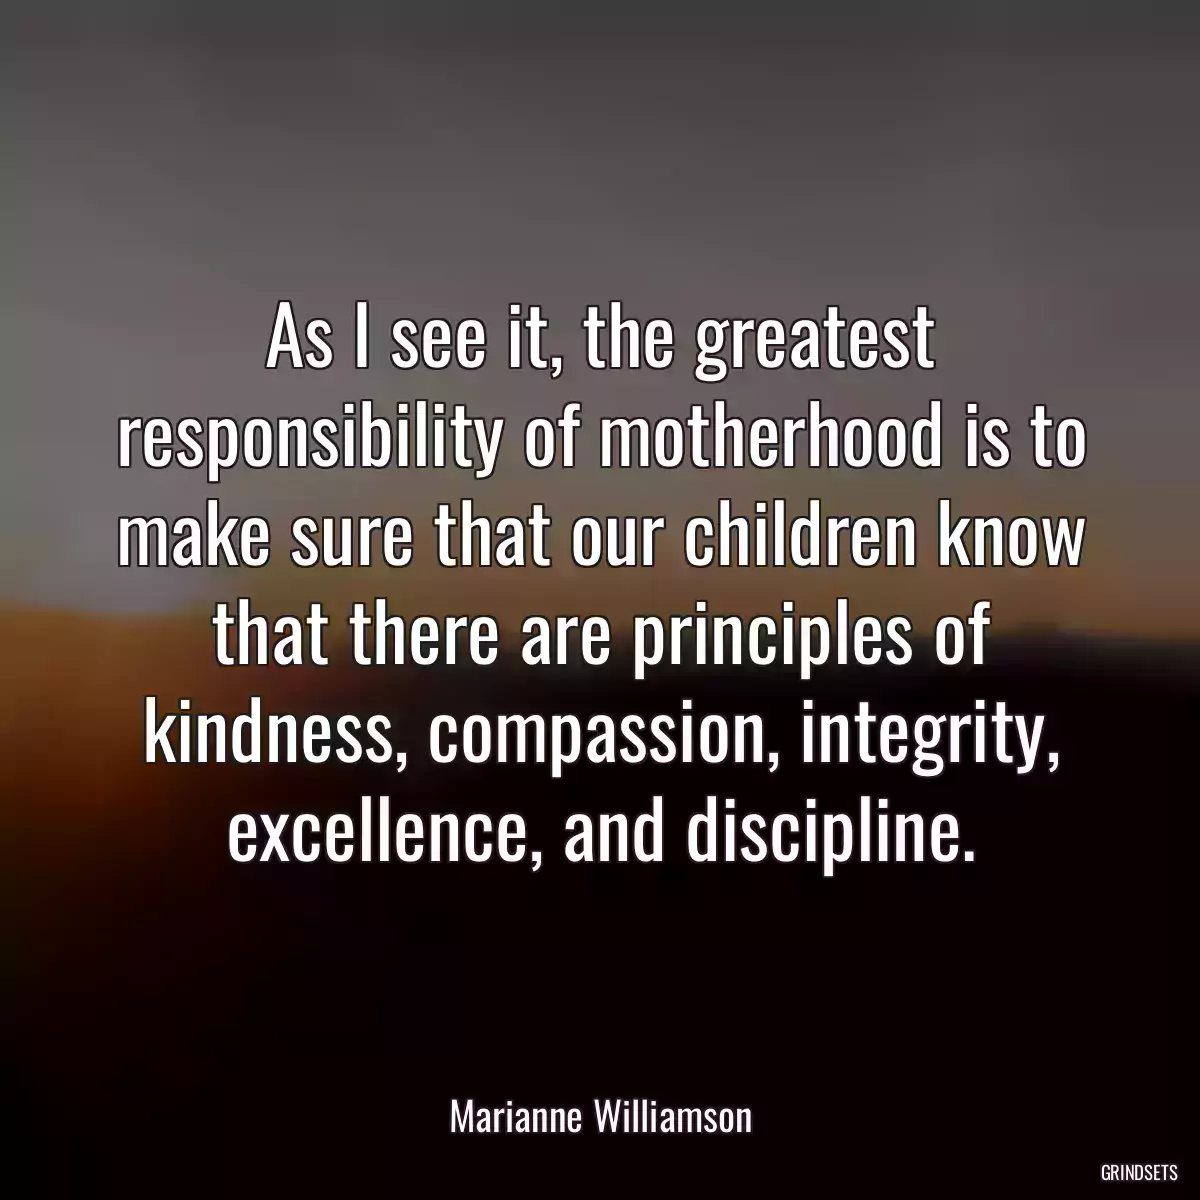 As I see it, the greatest responsibility of motherhood is to make sure that our children know that there are principles of kindness, compassion, integrity, excellence, and discipline.